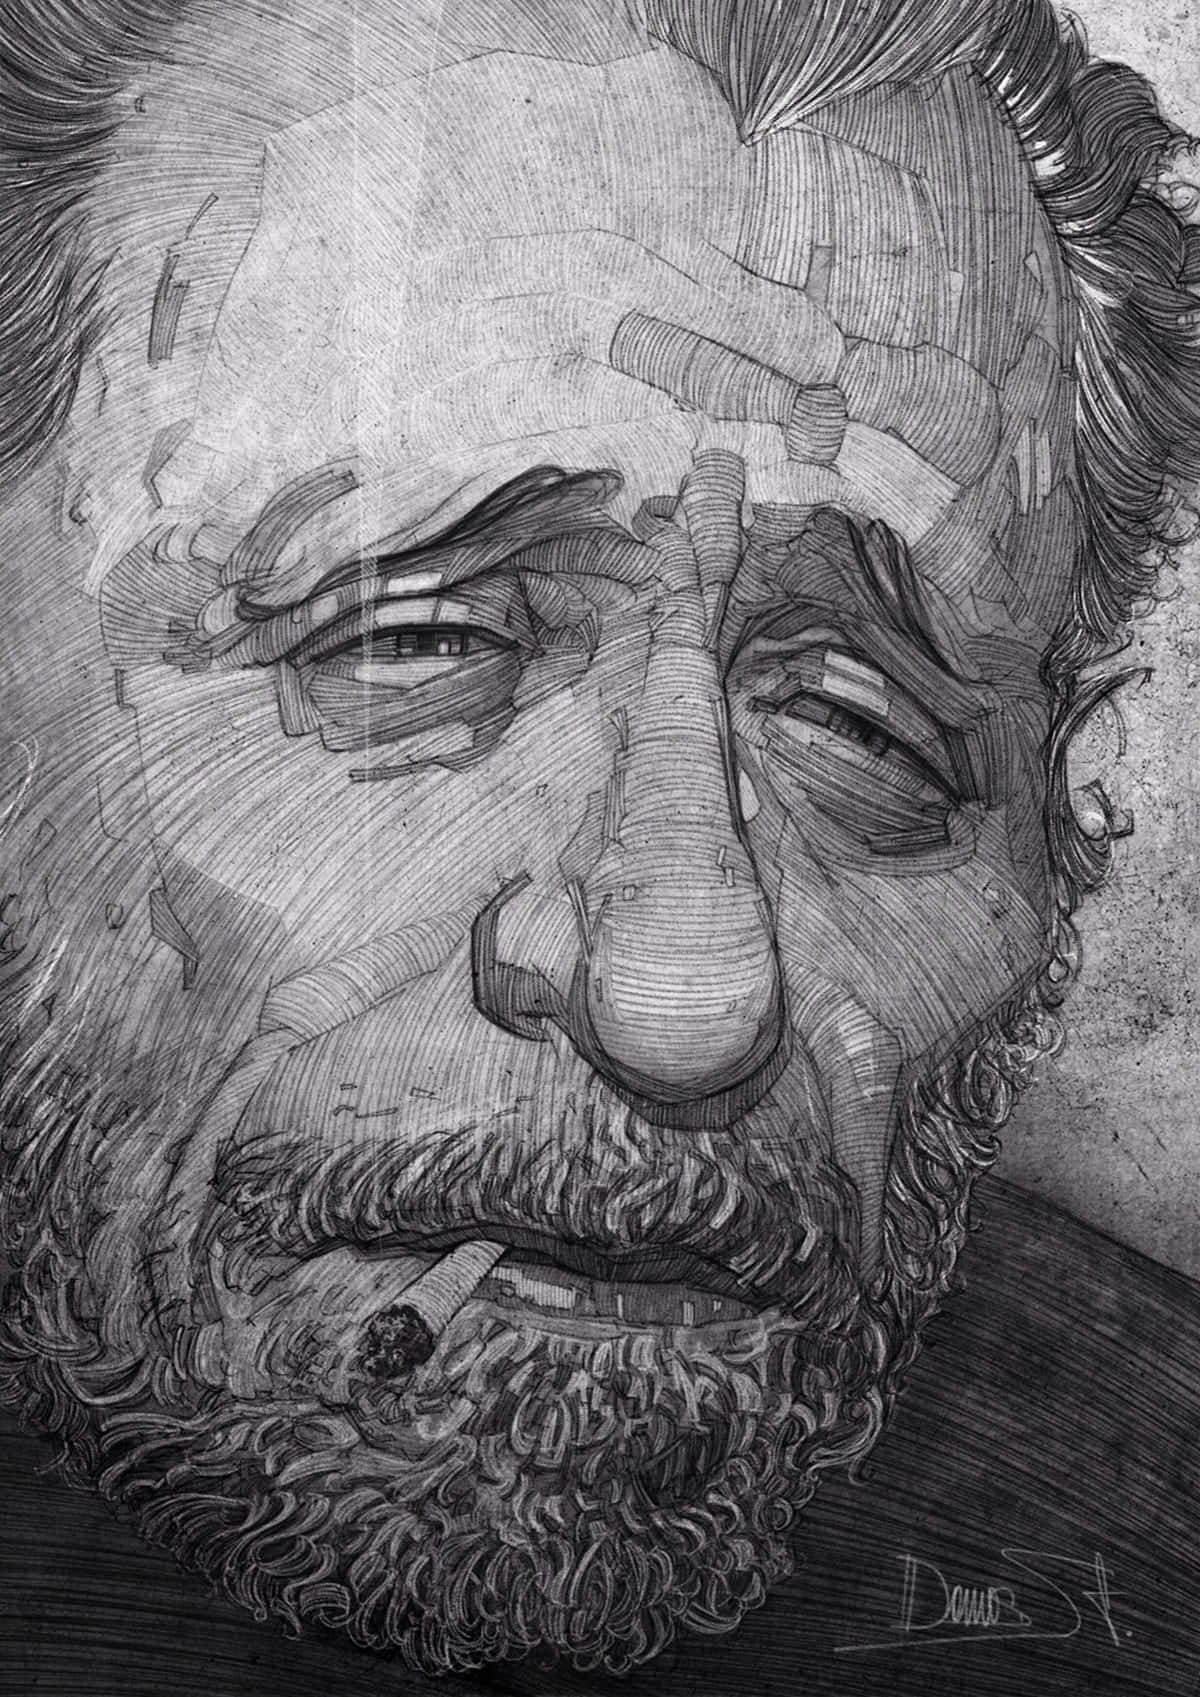 A Drawing Of An Old Man With A Beard